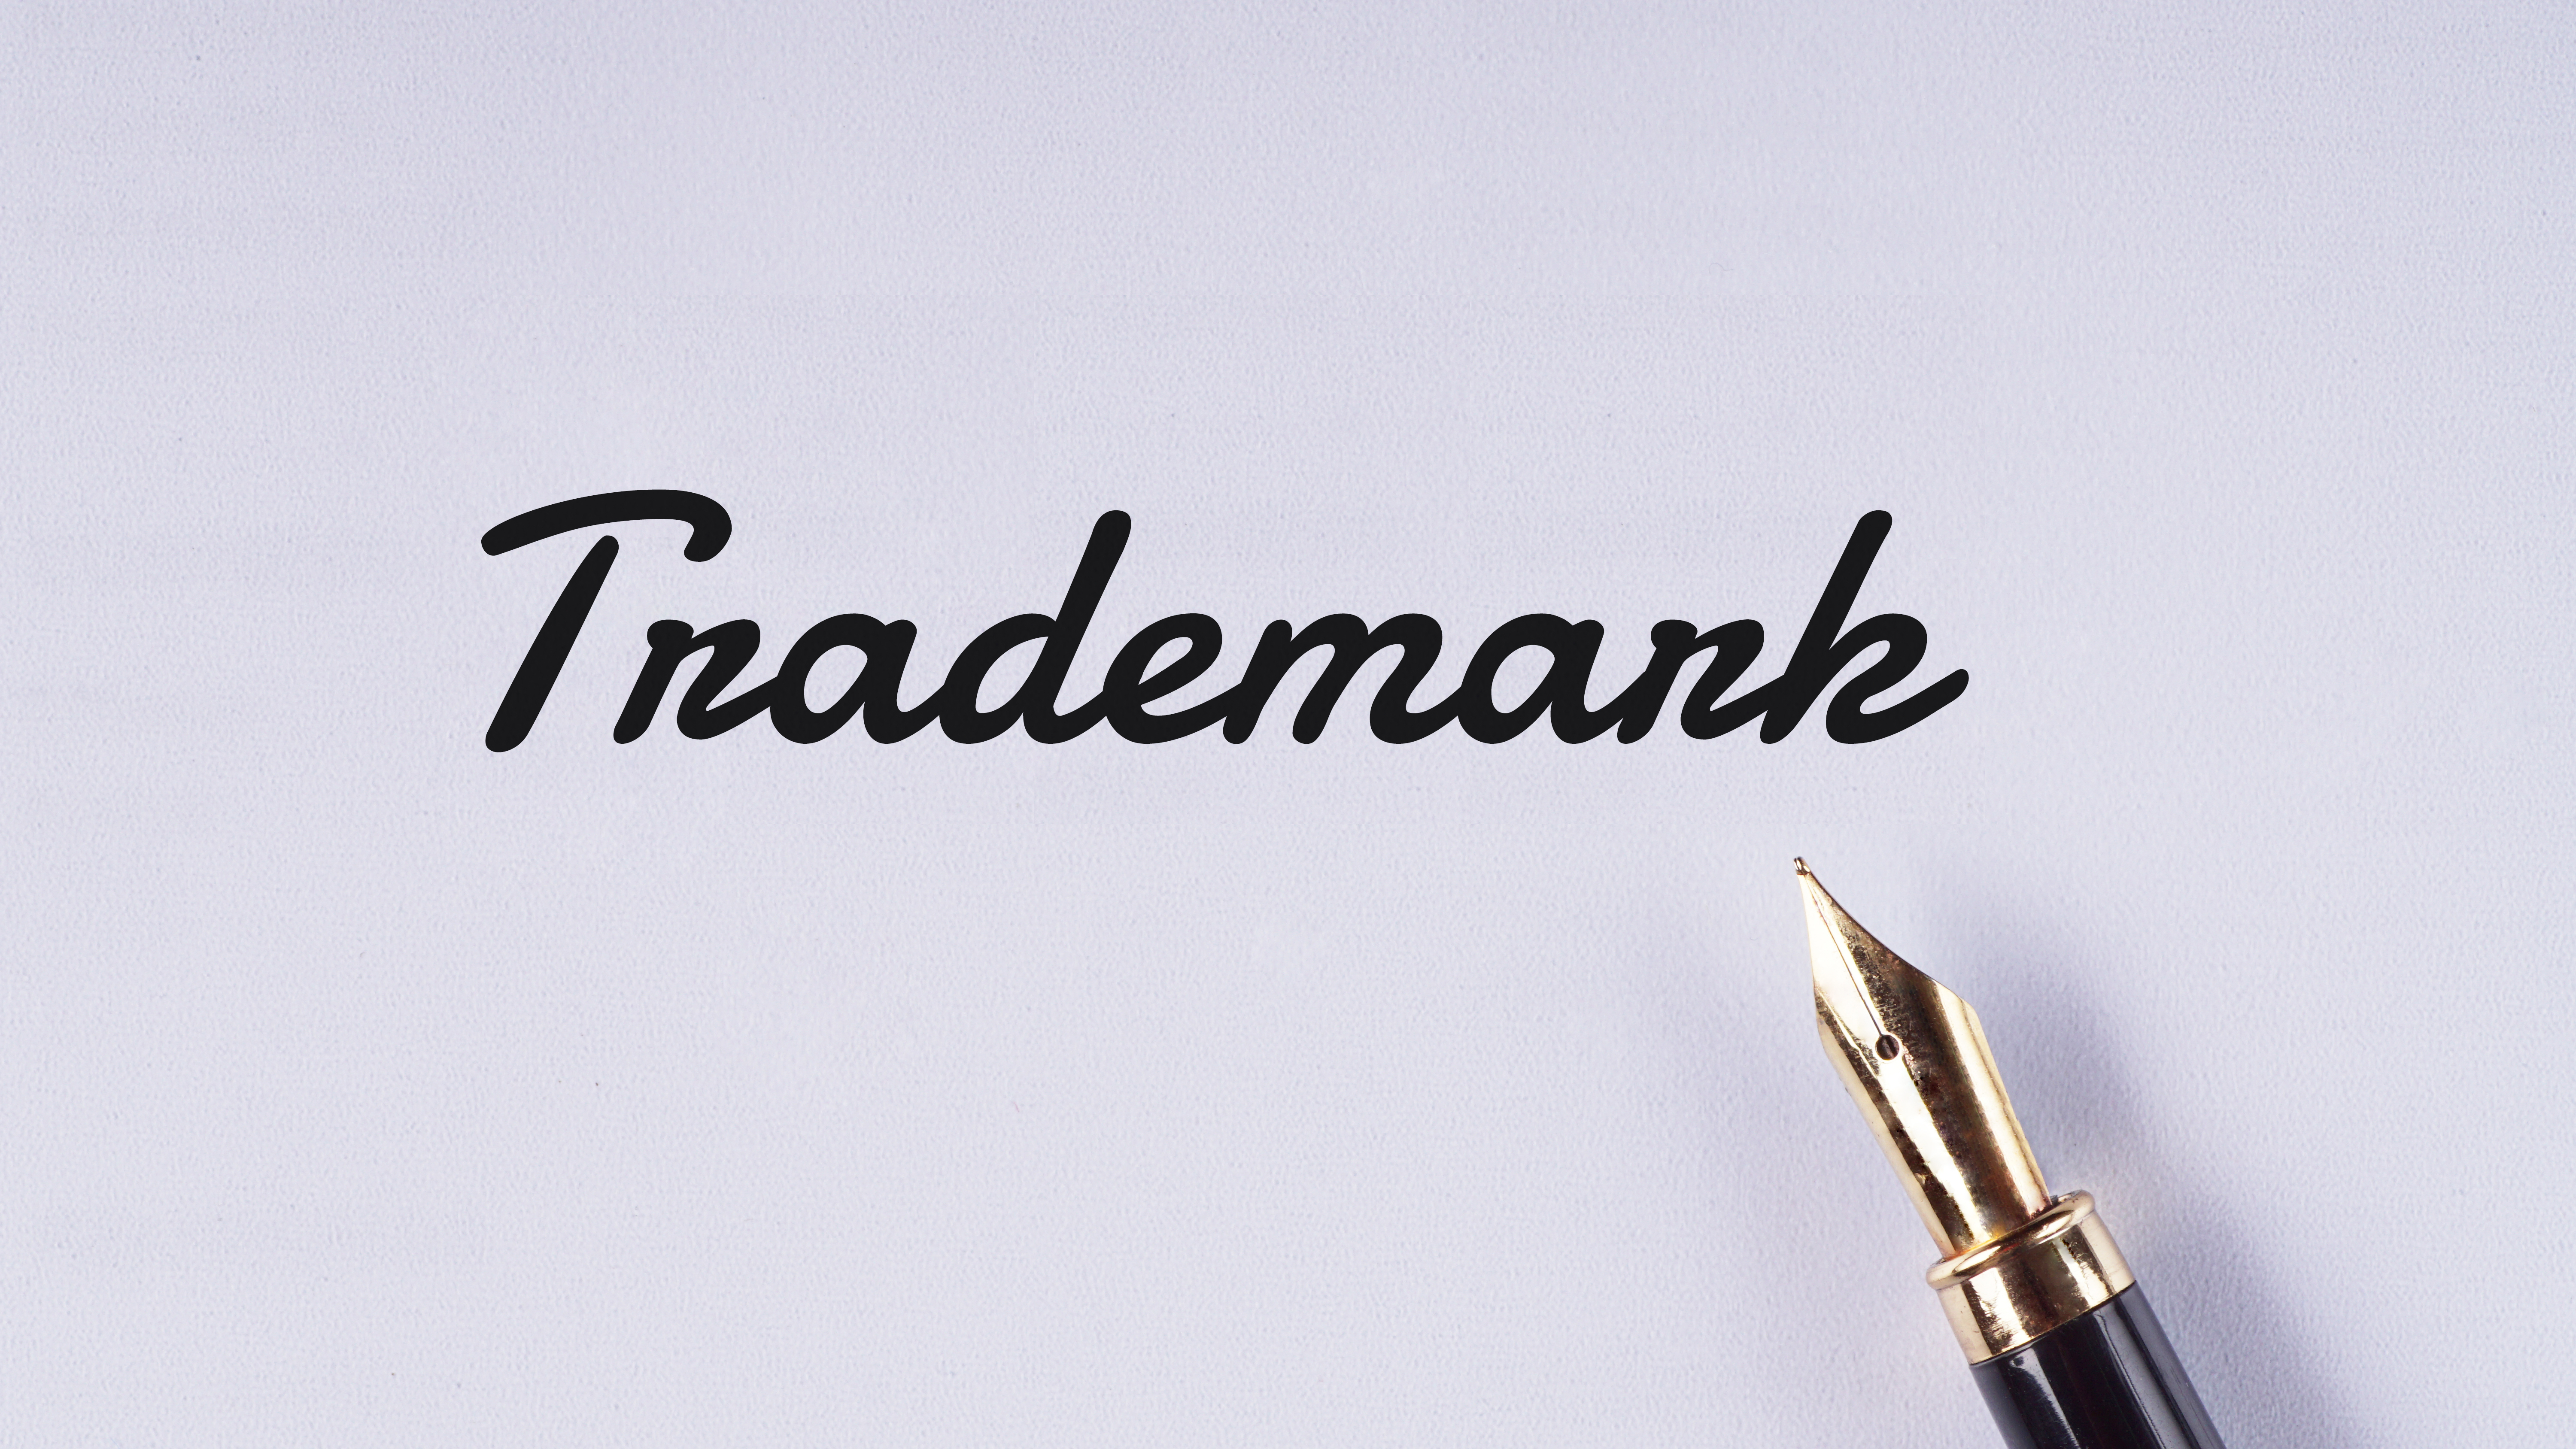 How to check trademark status in US?